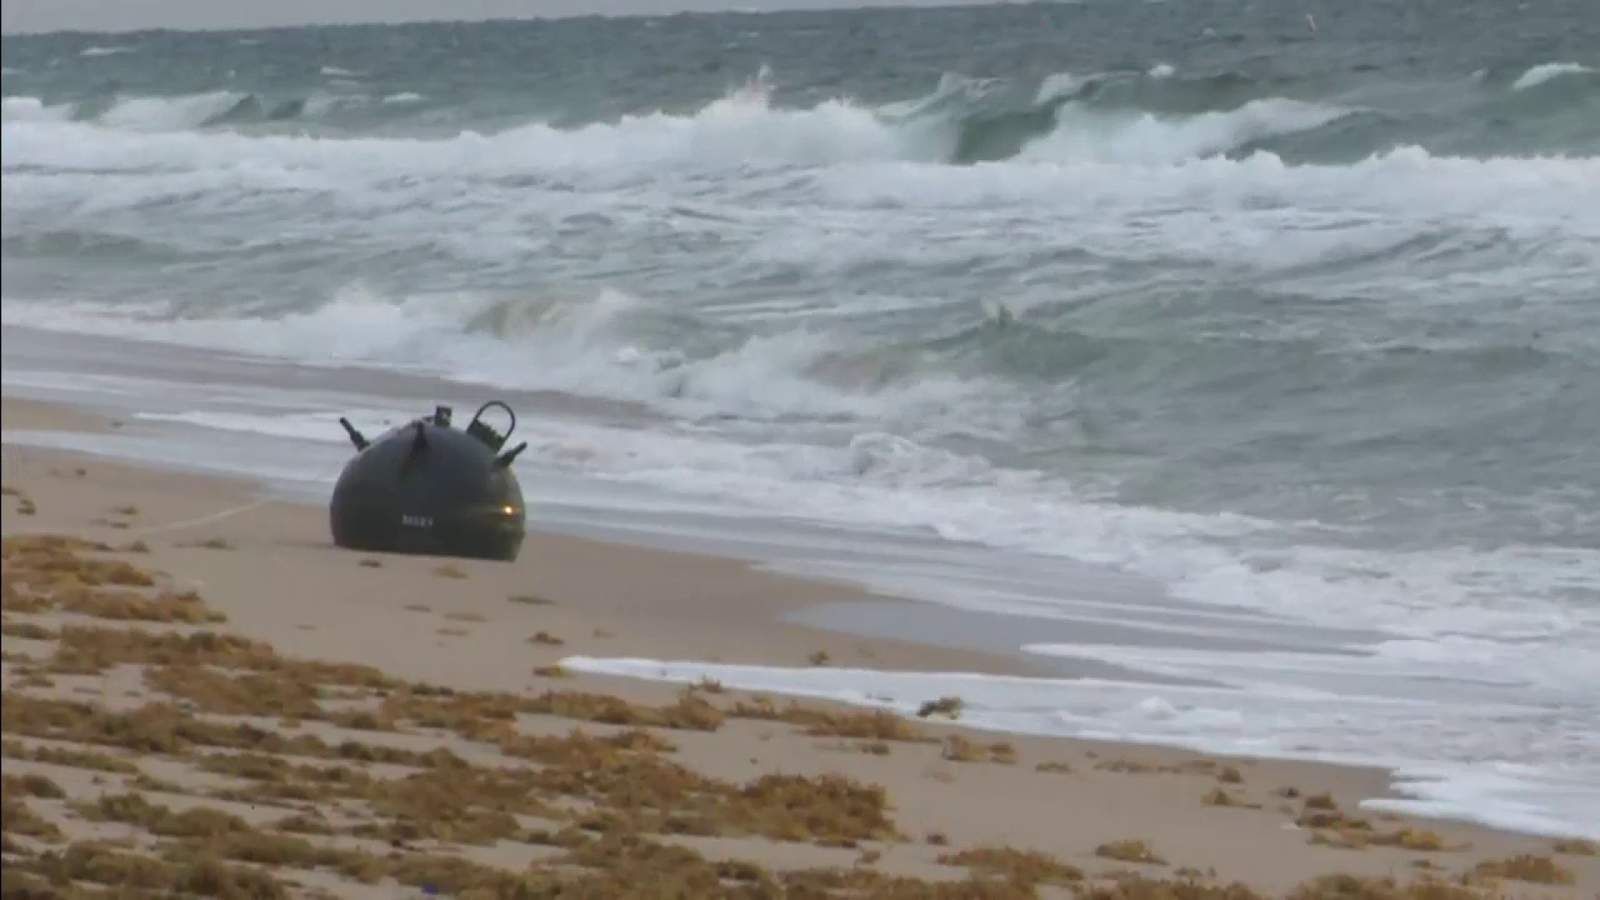 Naval mine hits shore in Lauderdale-by-the-Sea